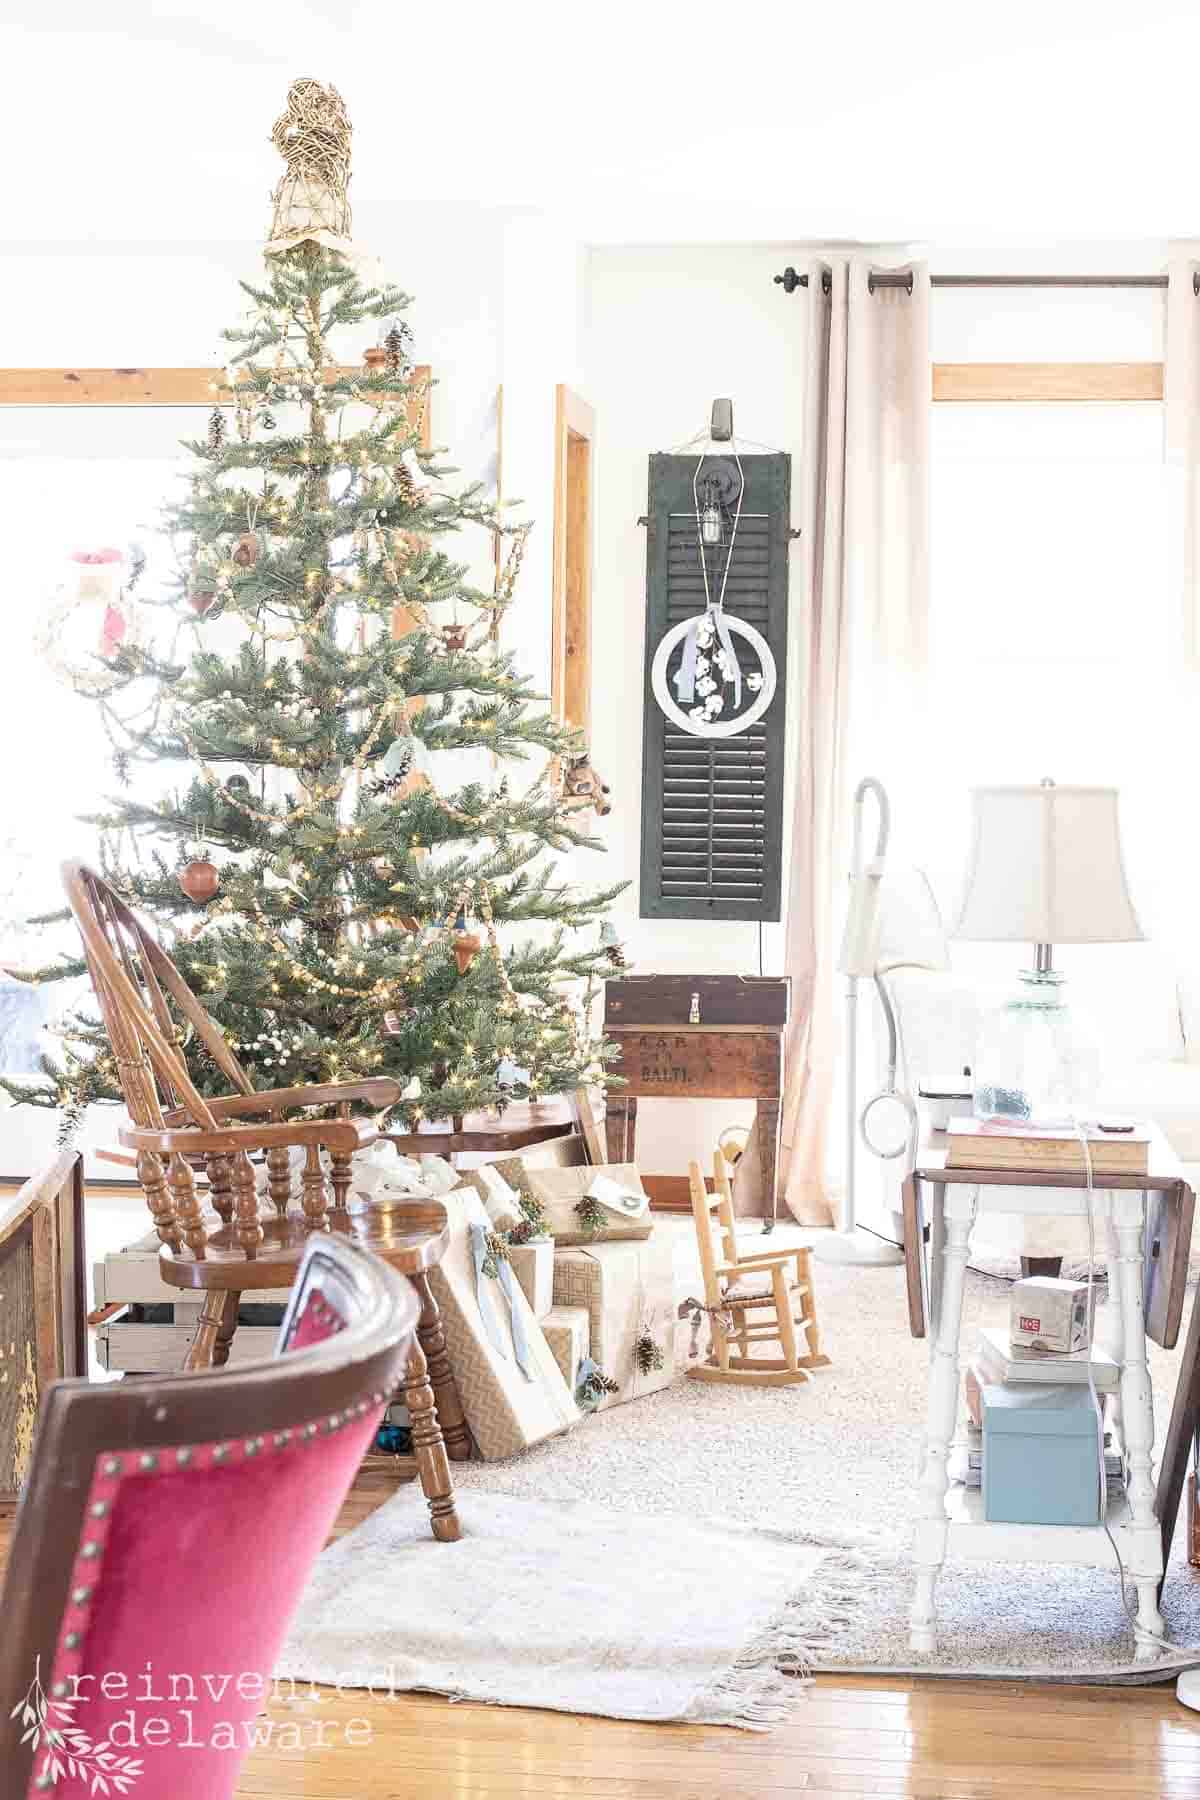 Christmas tree in an open concept living space with wrapped packages underneatht the tree